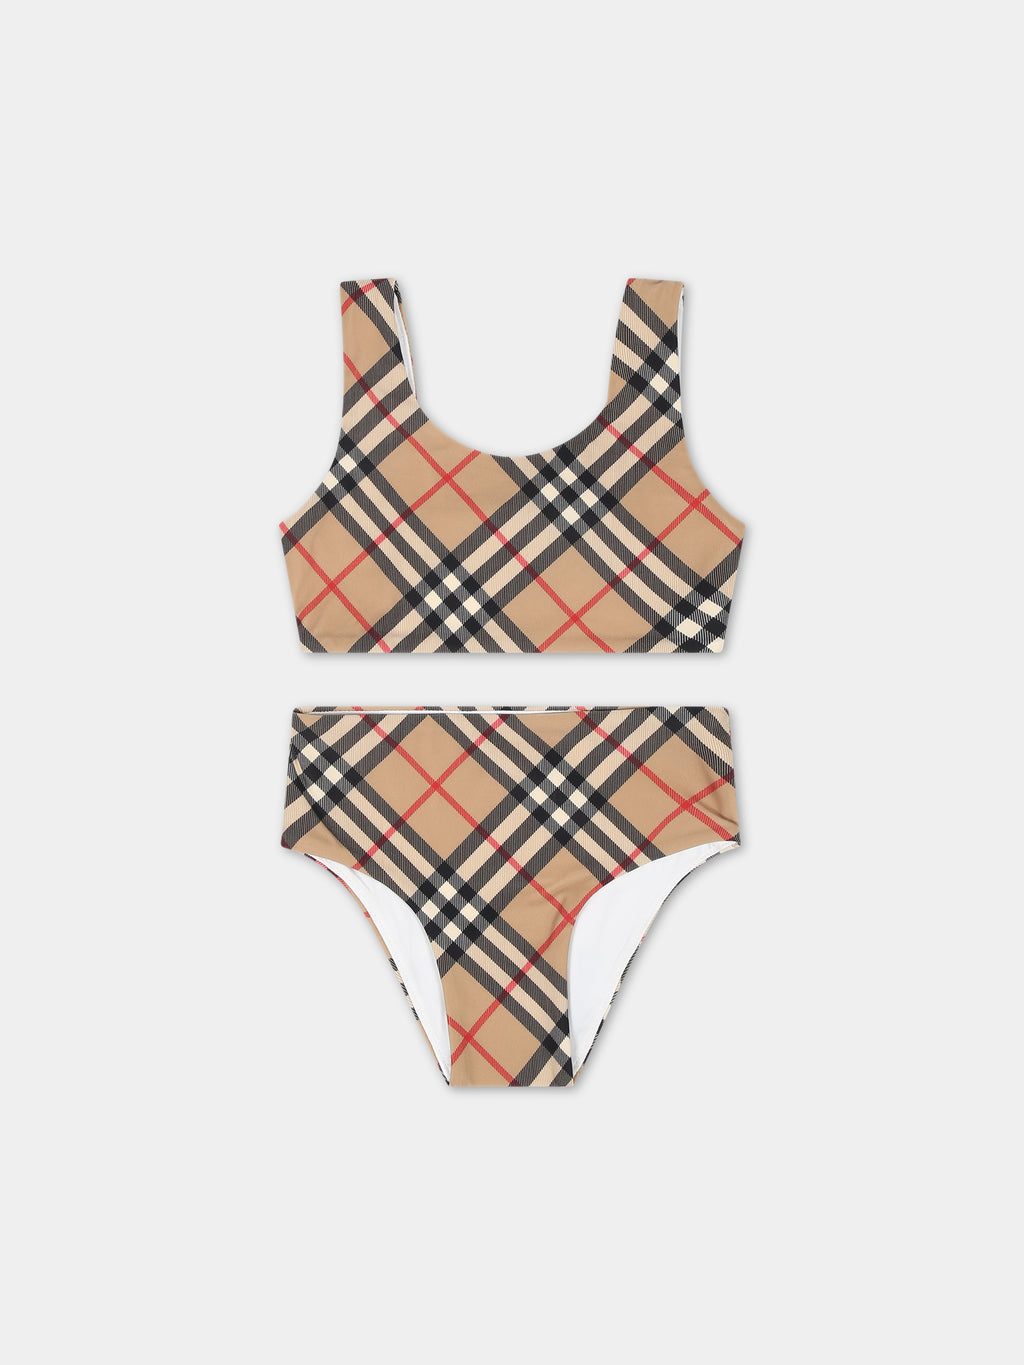 Beige bikini for baby girl with vintage check